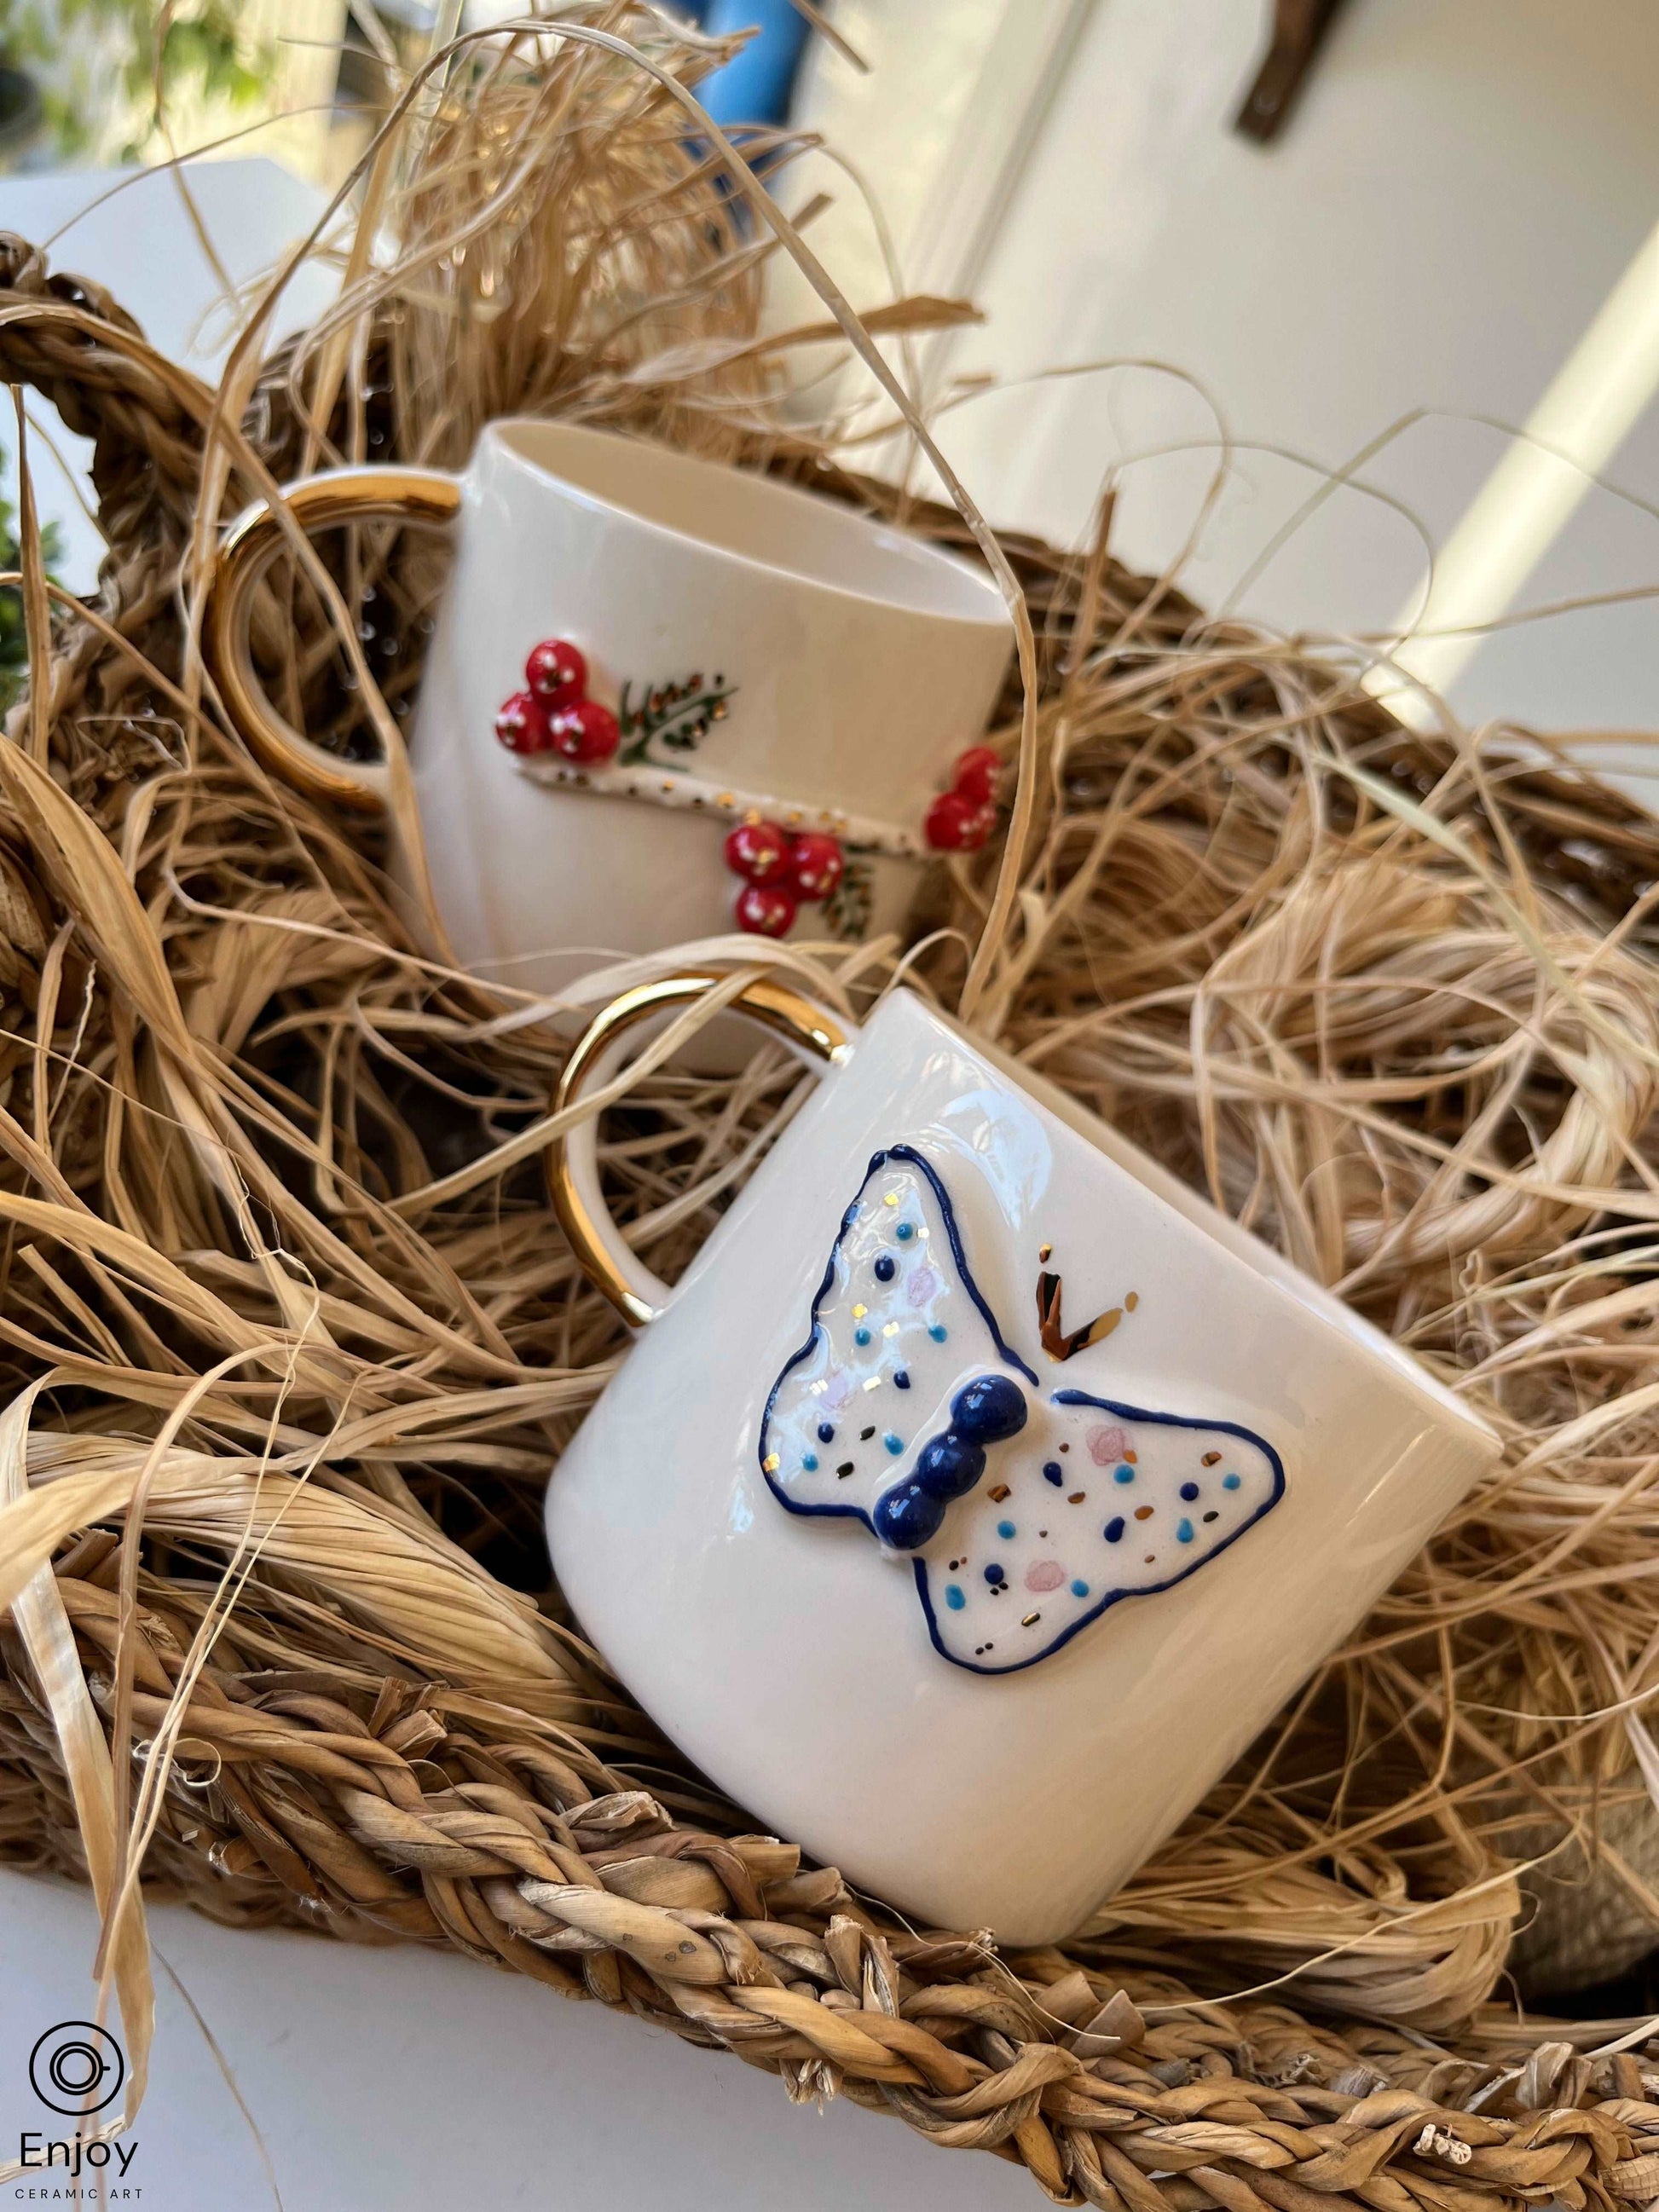 An intricately designed ceramic mug with a golden handle, nestled in a bed of straw within a woven basket. The mug features a delicate blue butterfly motif, adding a touch of whimsy to the rustic setting.